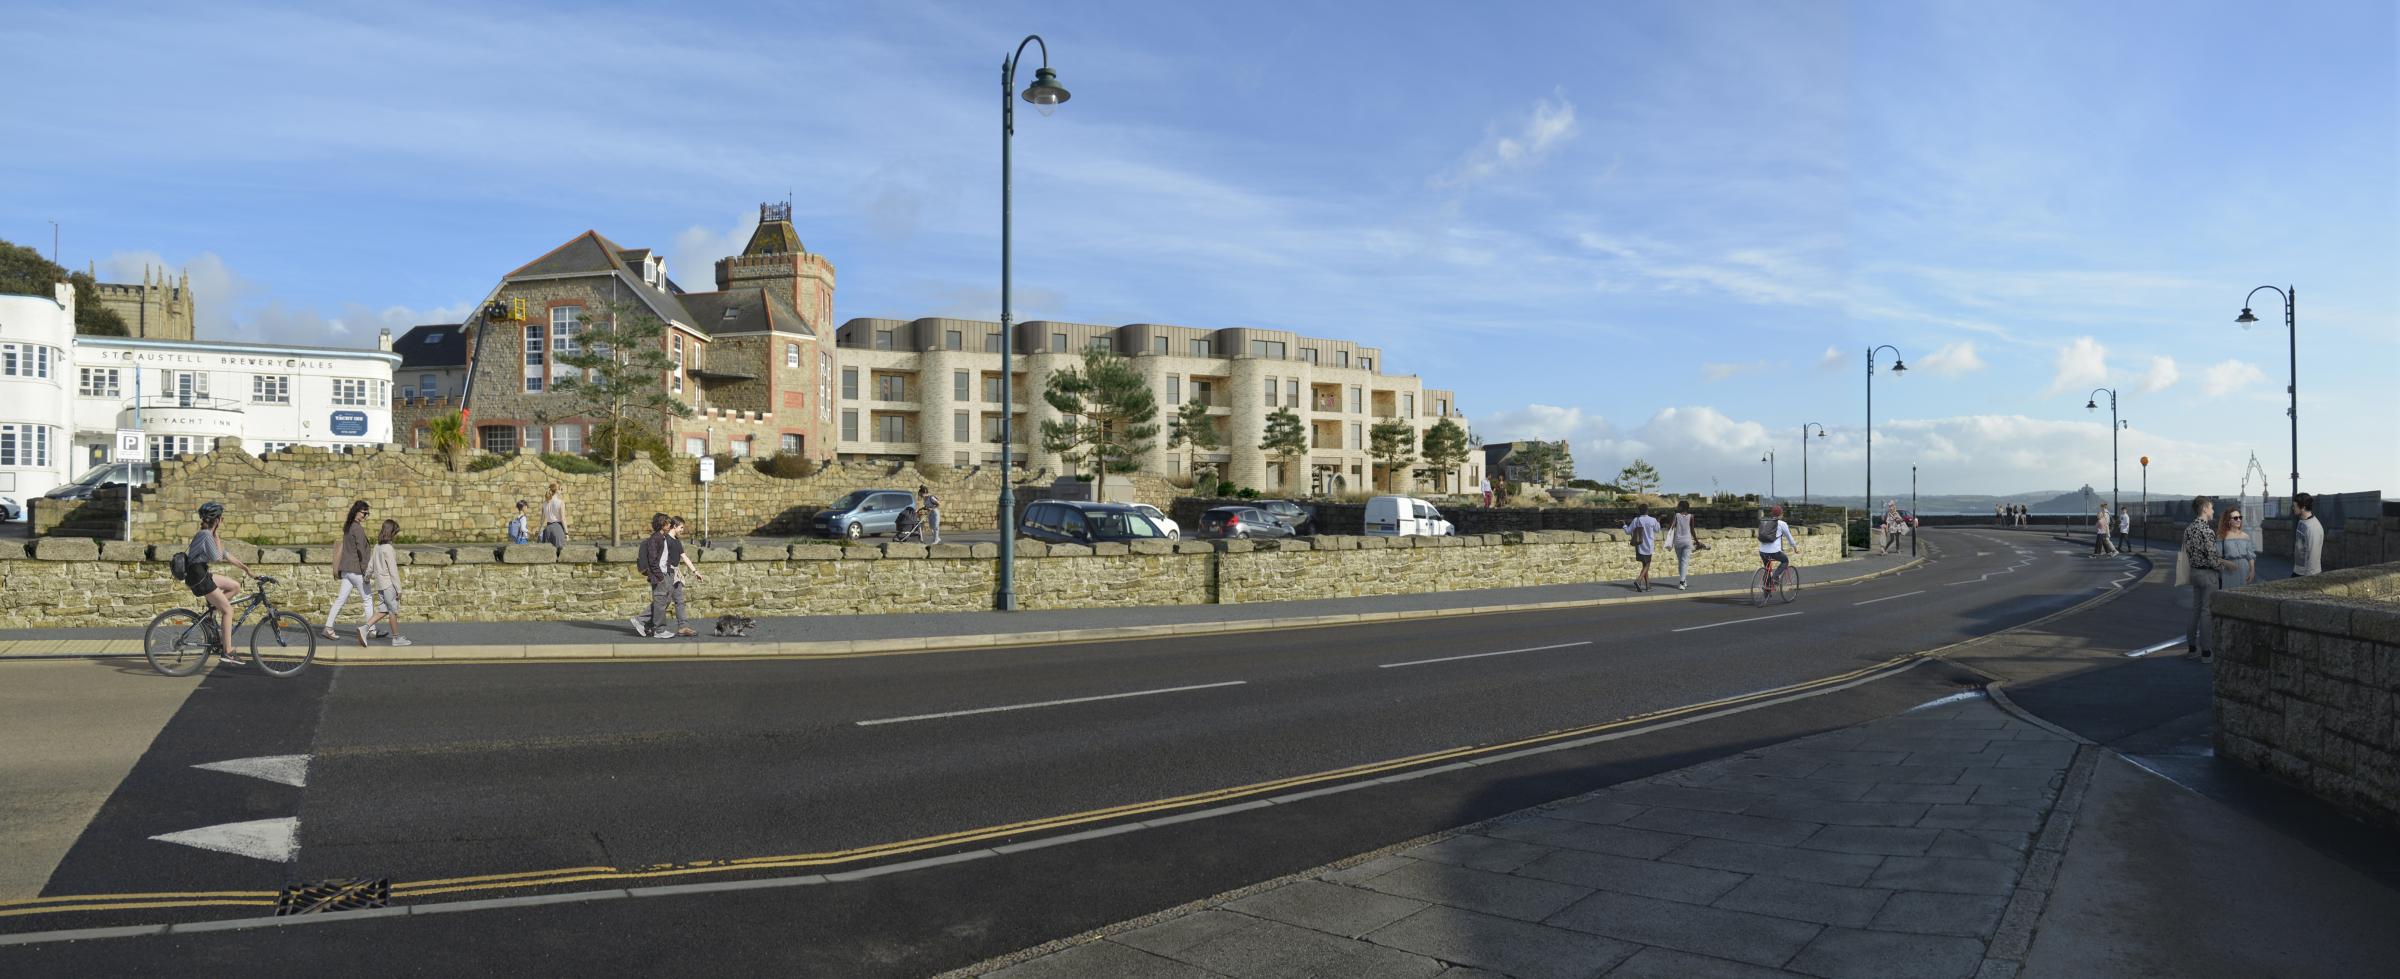 How the amended Coinagehall plans in Penzance look (Pic: Mei Loci Landscape Architects)